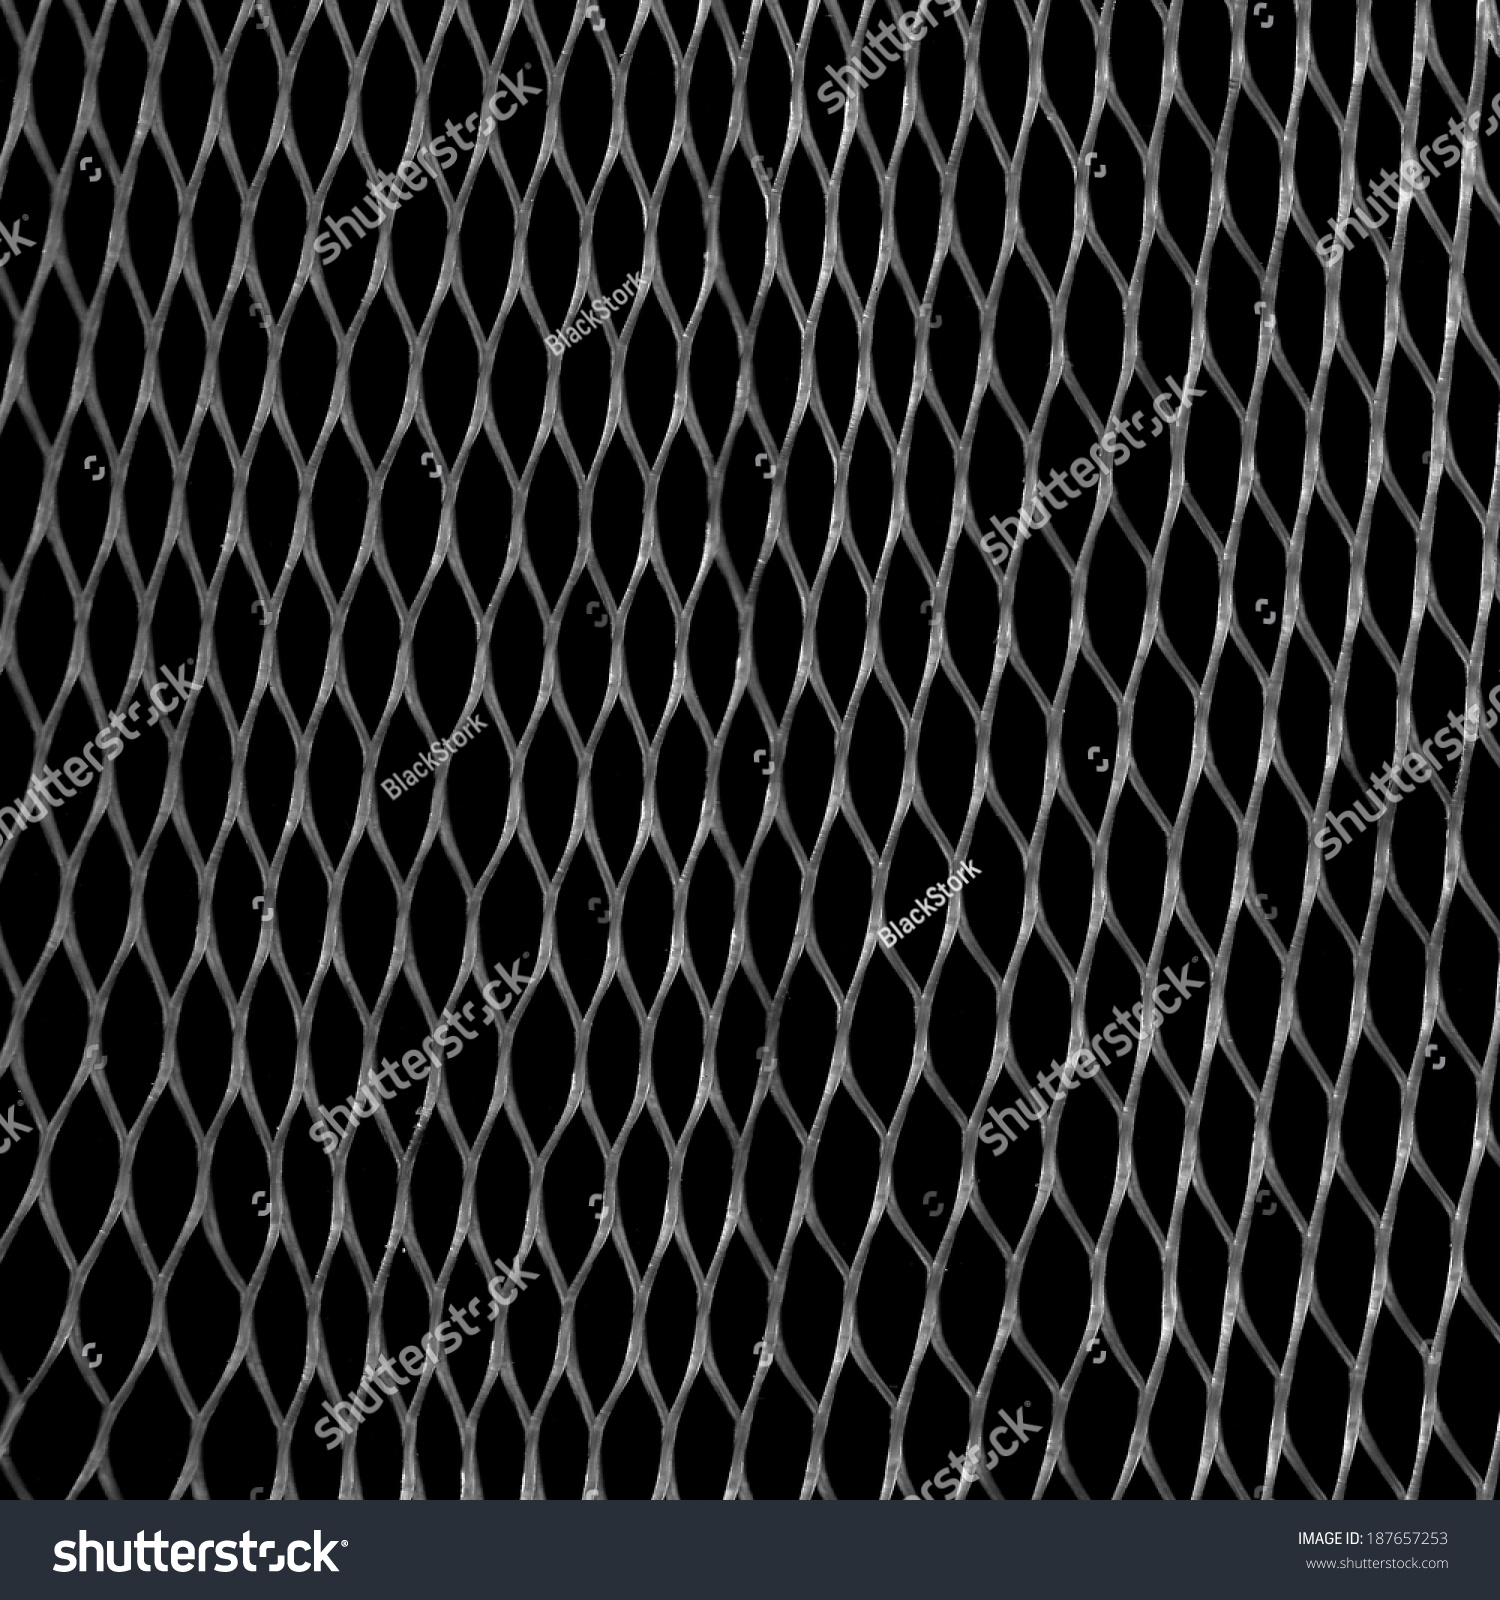 Plastic Grid Packing Texture Stock Photo 187657253 - Shutterstock